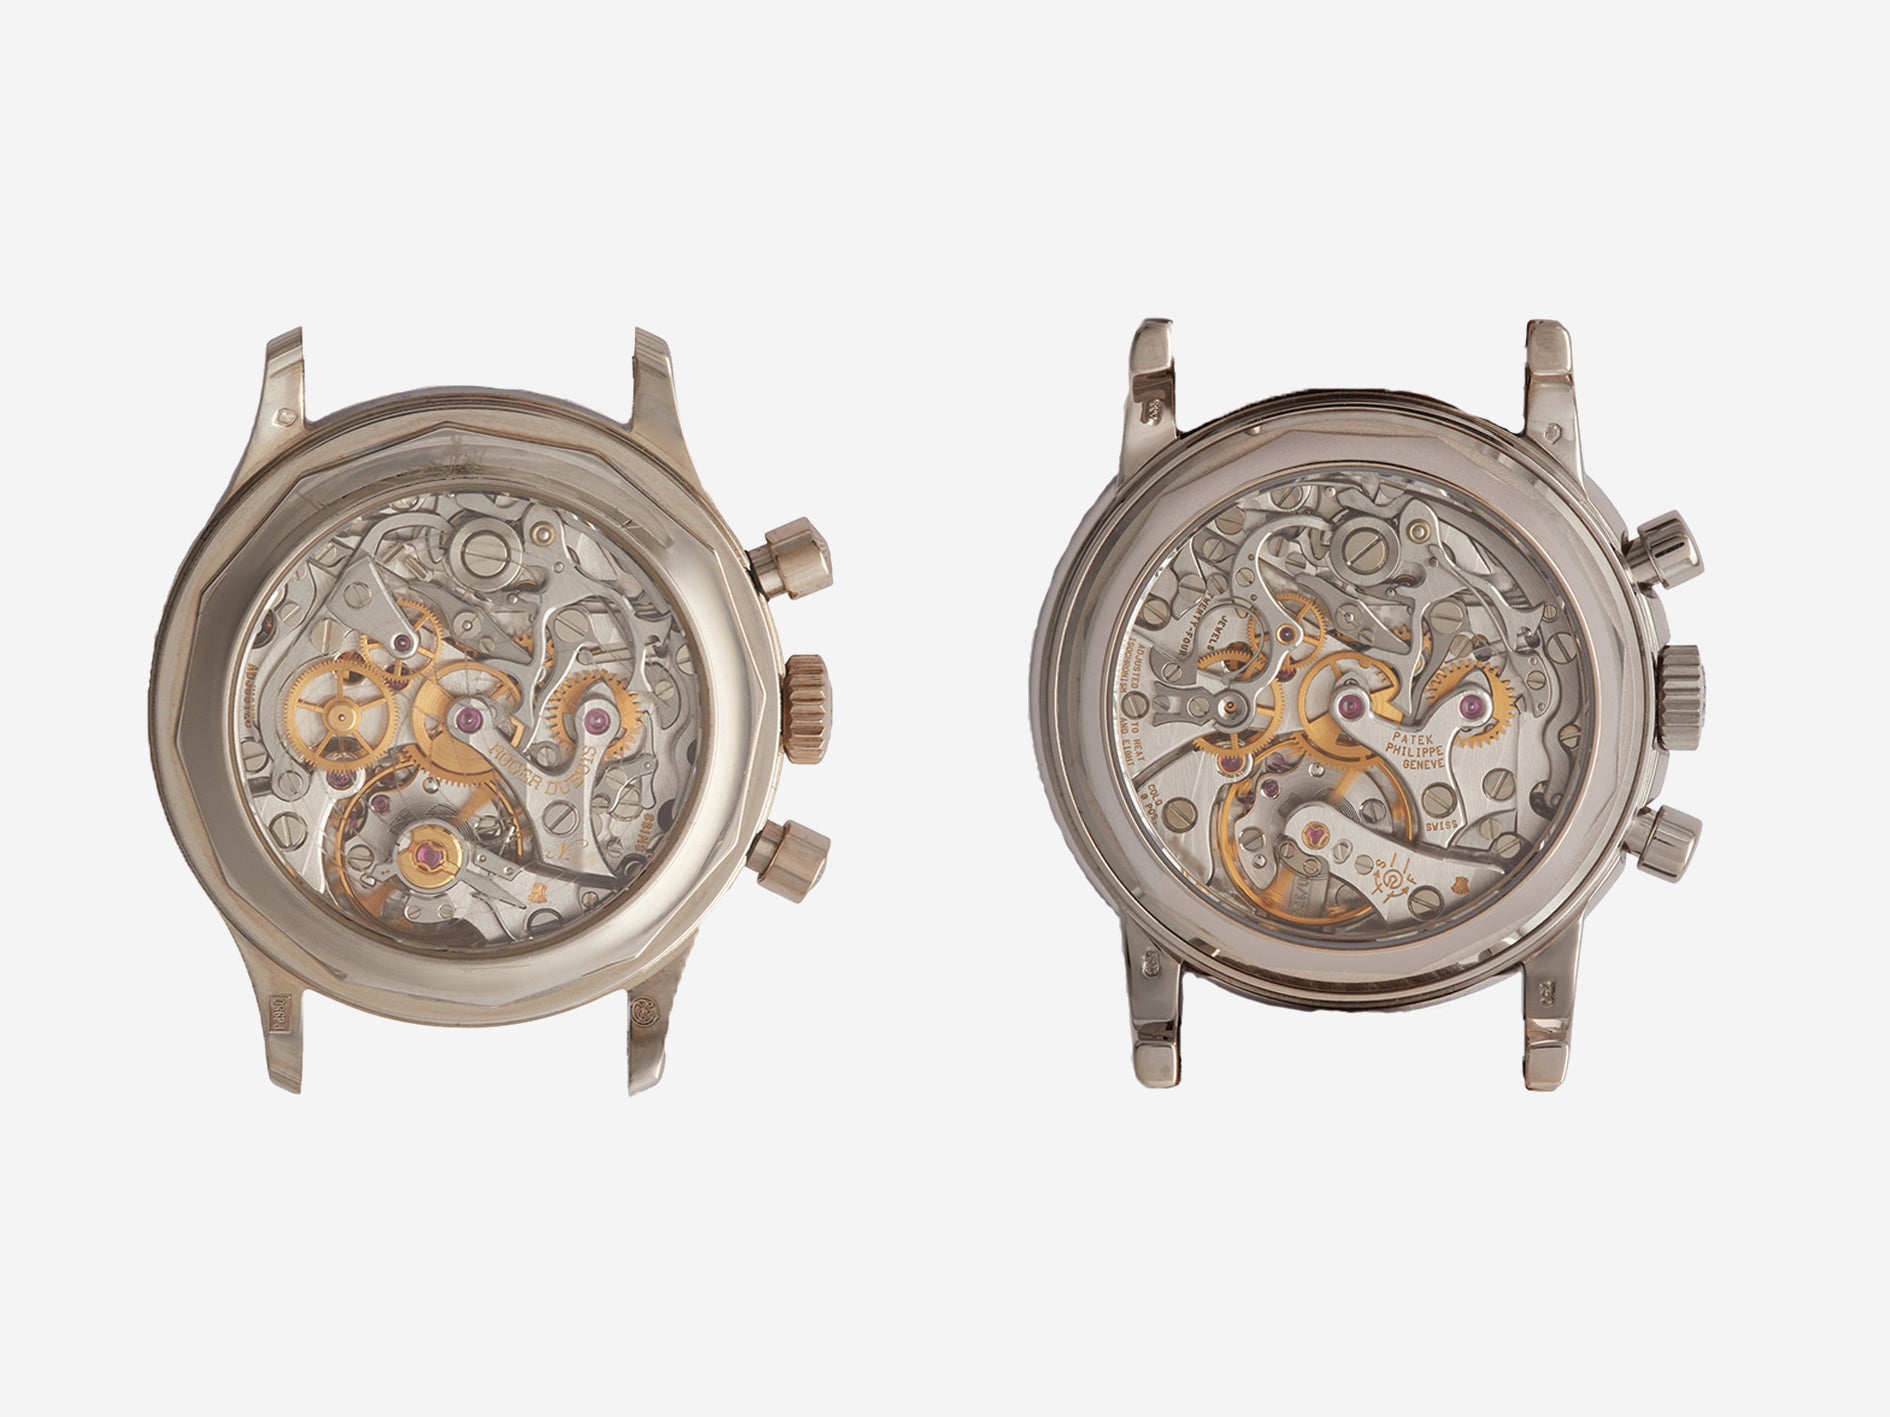 Watch movement of Patek Philippe ref. 3970 and Roger Dubuis Hommage Chronograph H34 at A Collected Man London